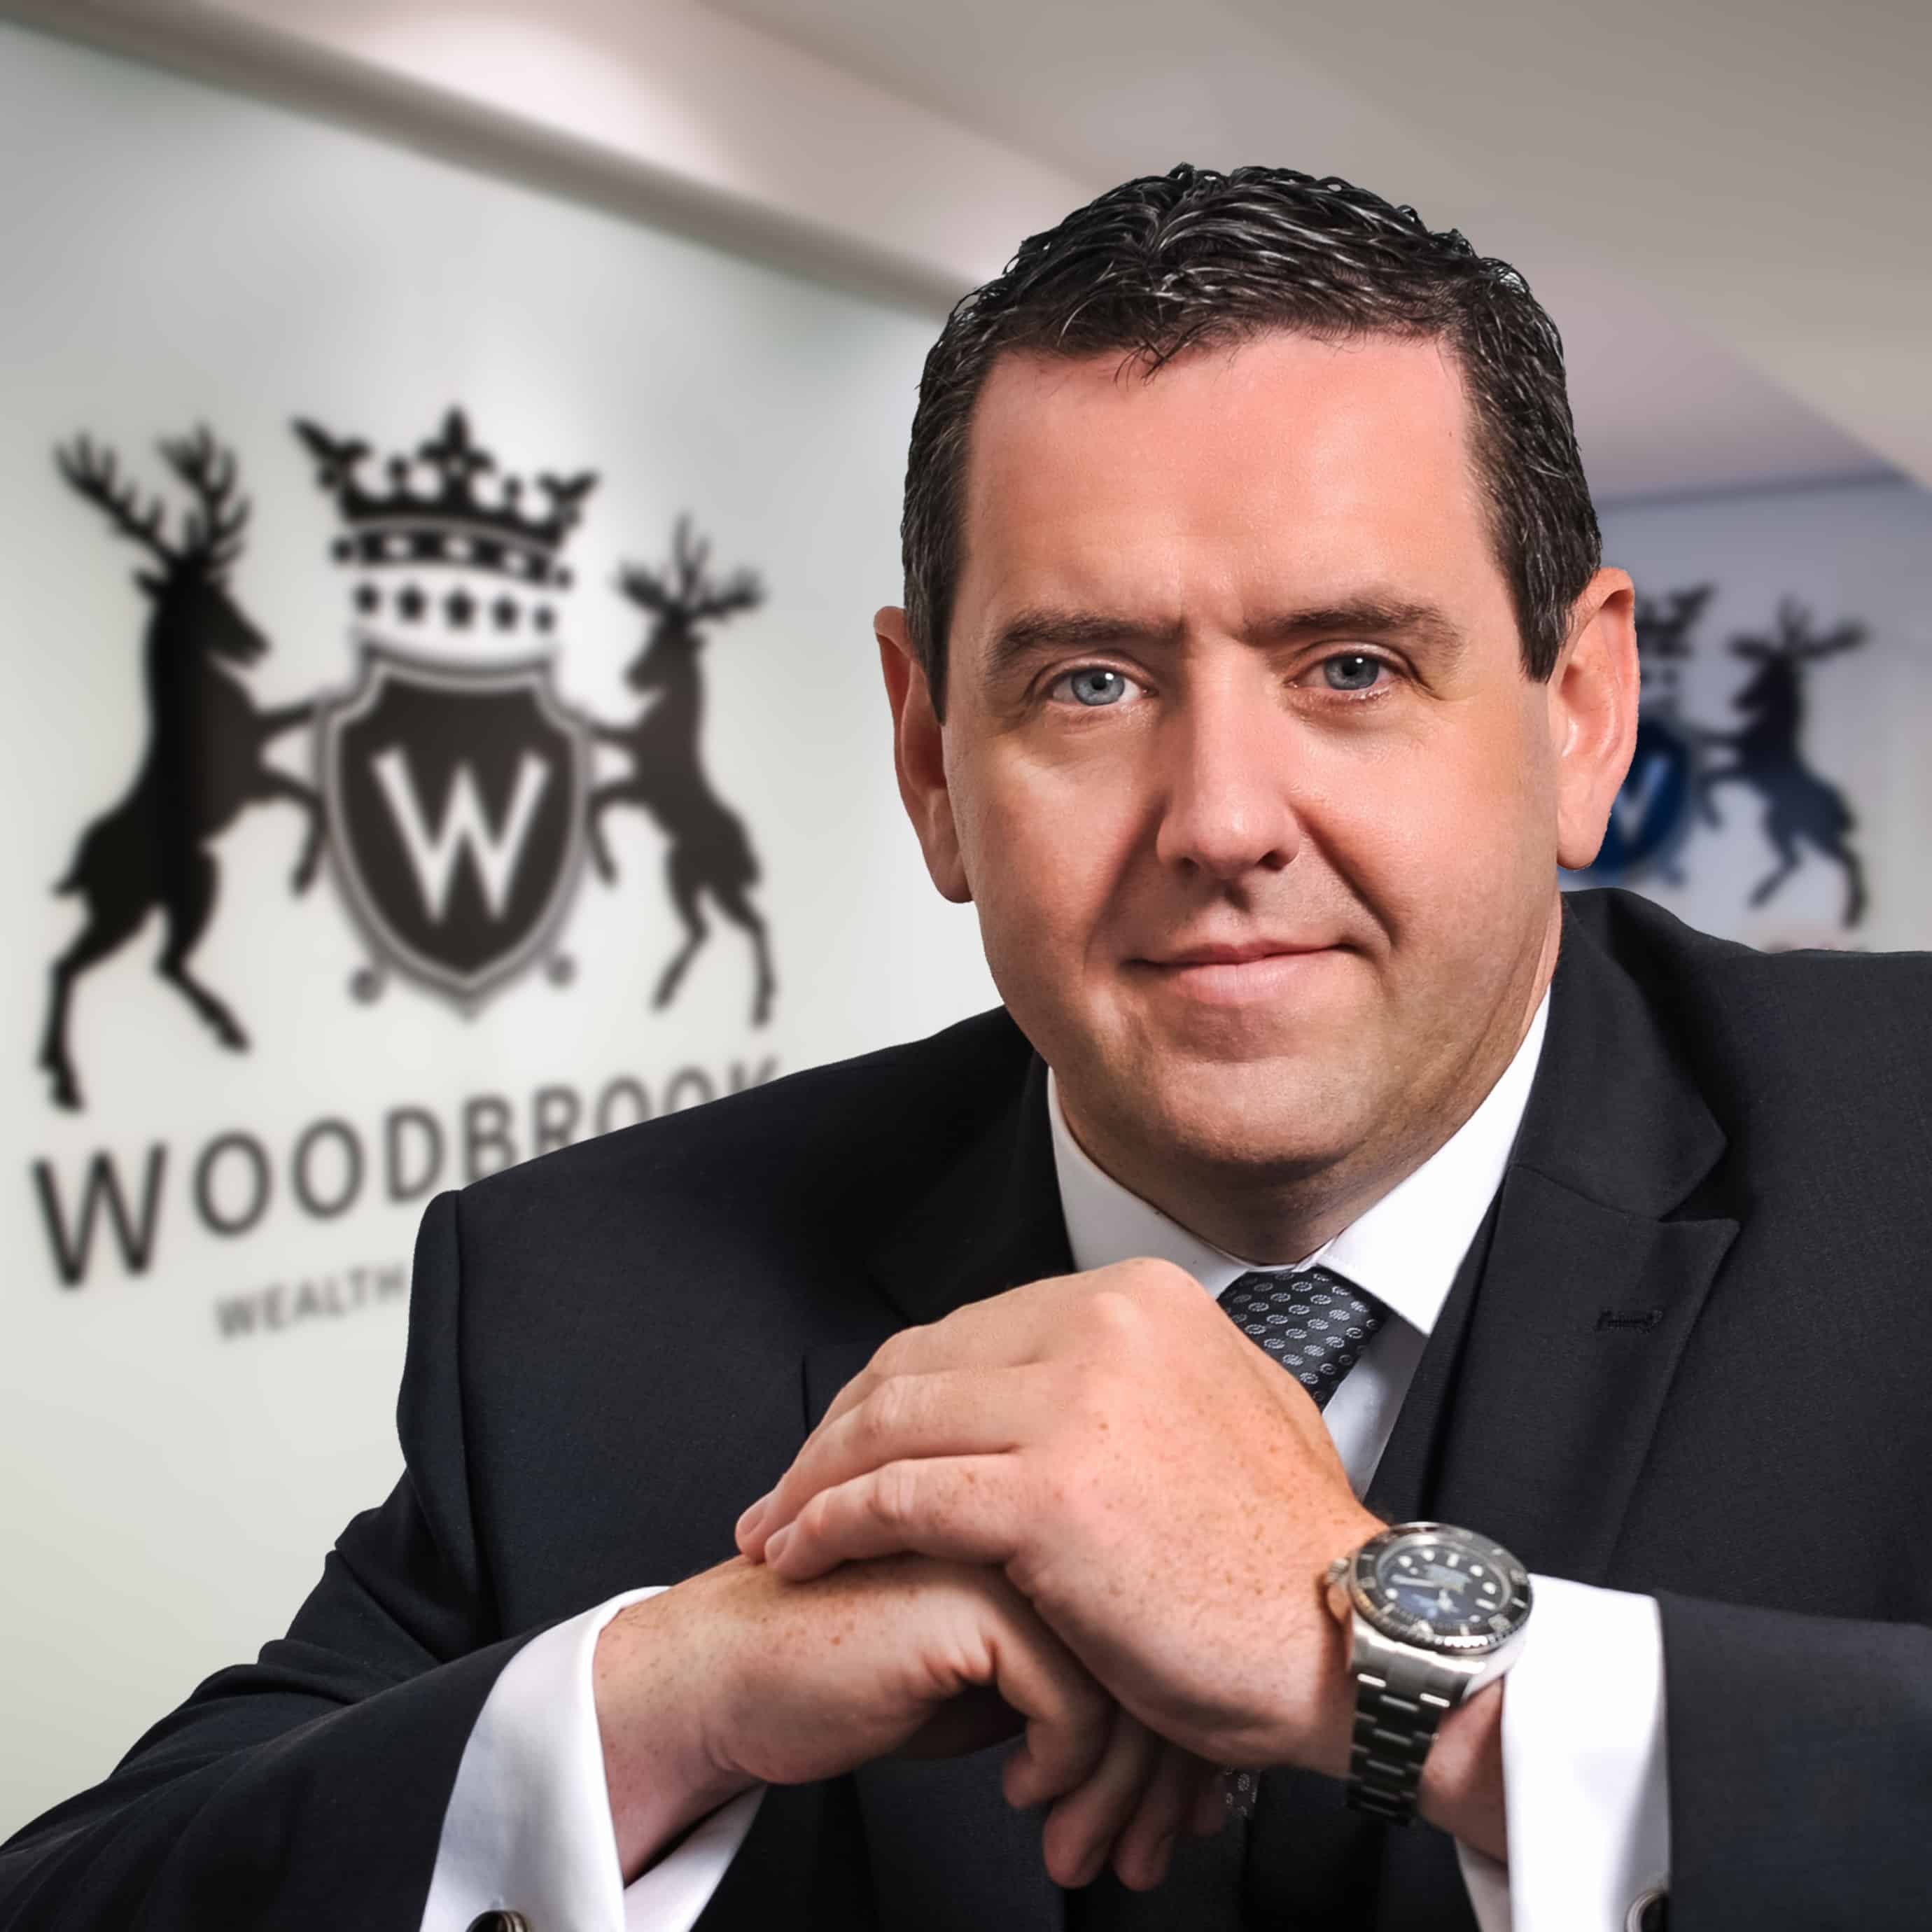 Michael Doherty, founder and CEO, Woodbrook Group.